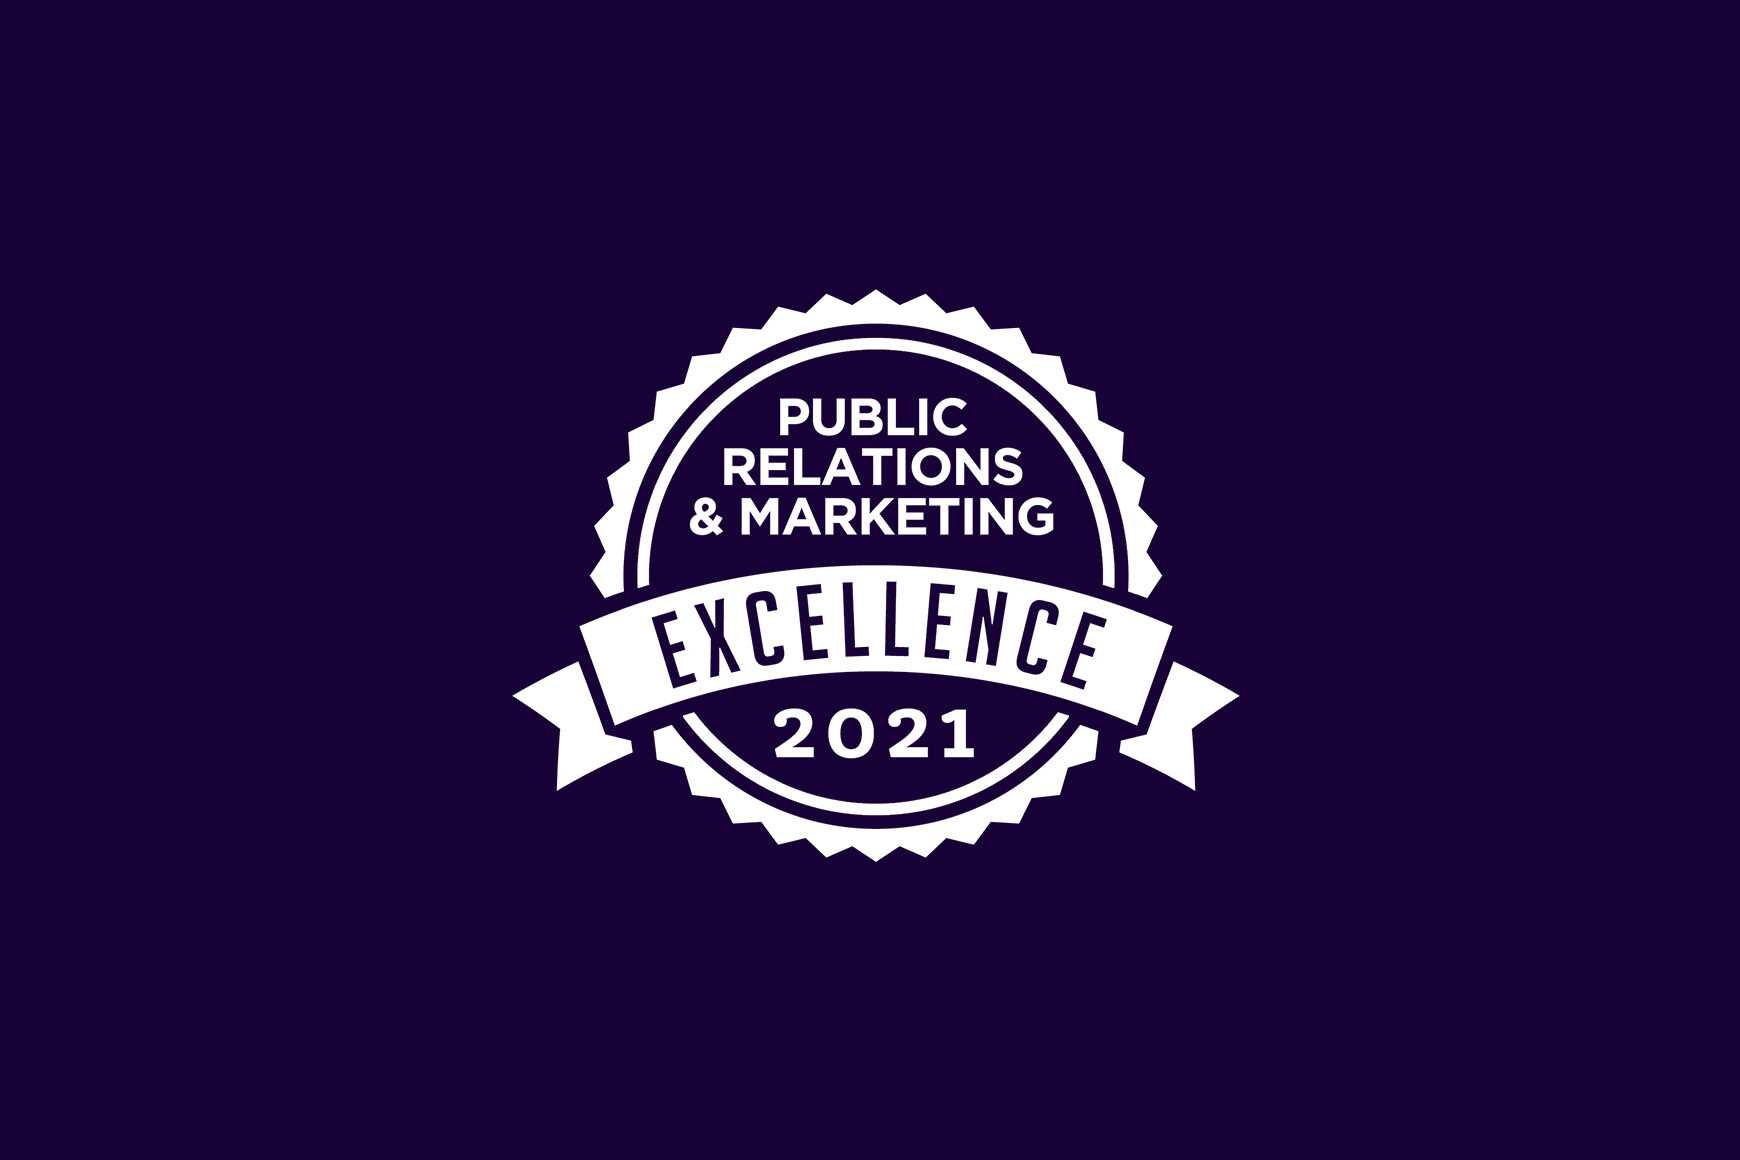 Talkdesk Wins 2021 BIG Public Relations and Marketing Excellence Award